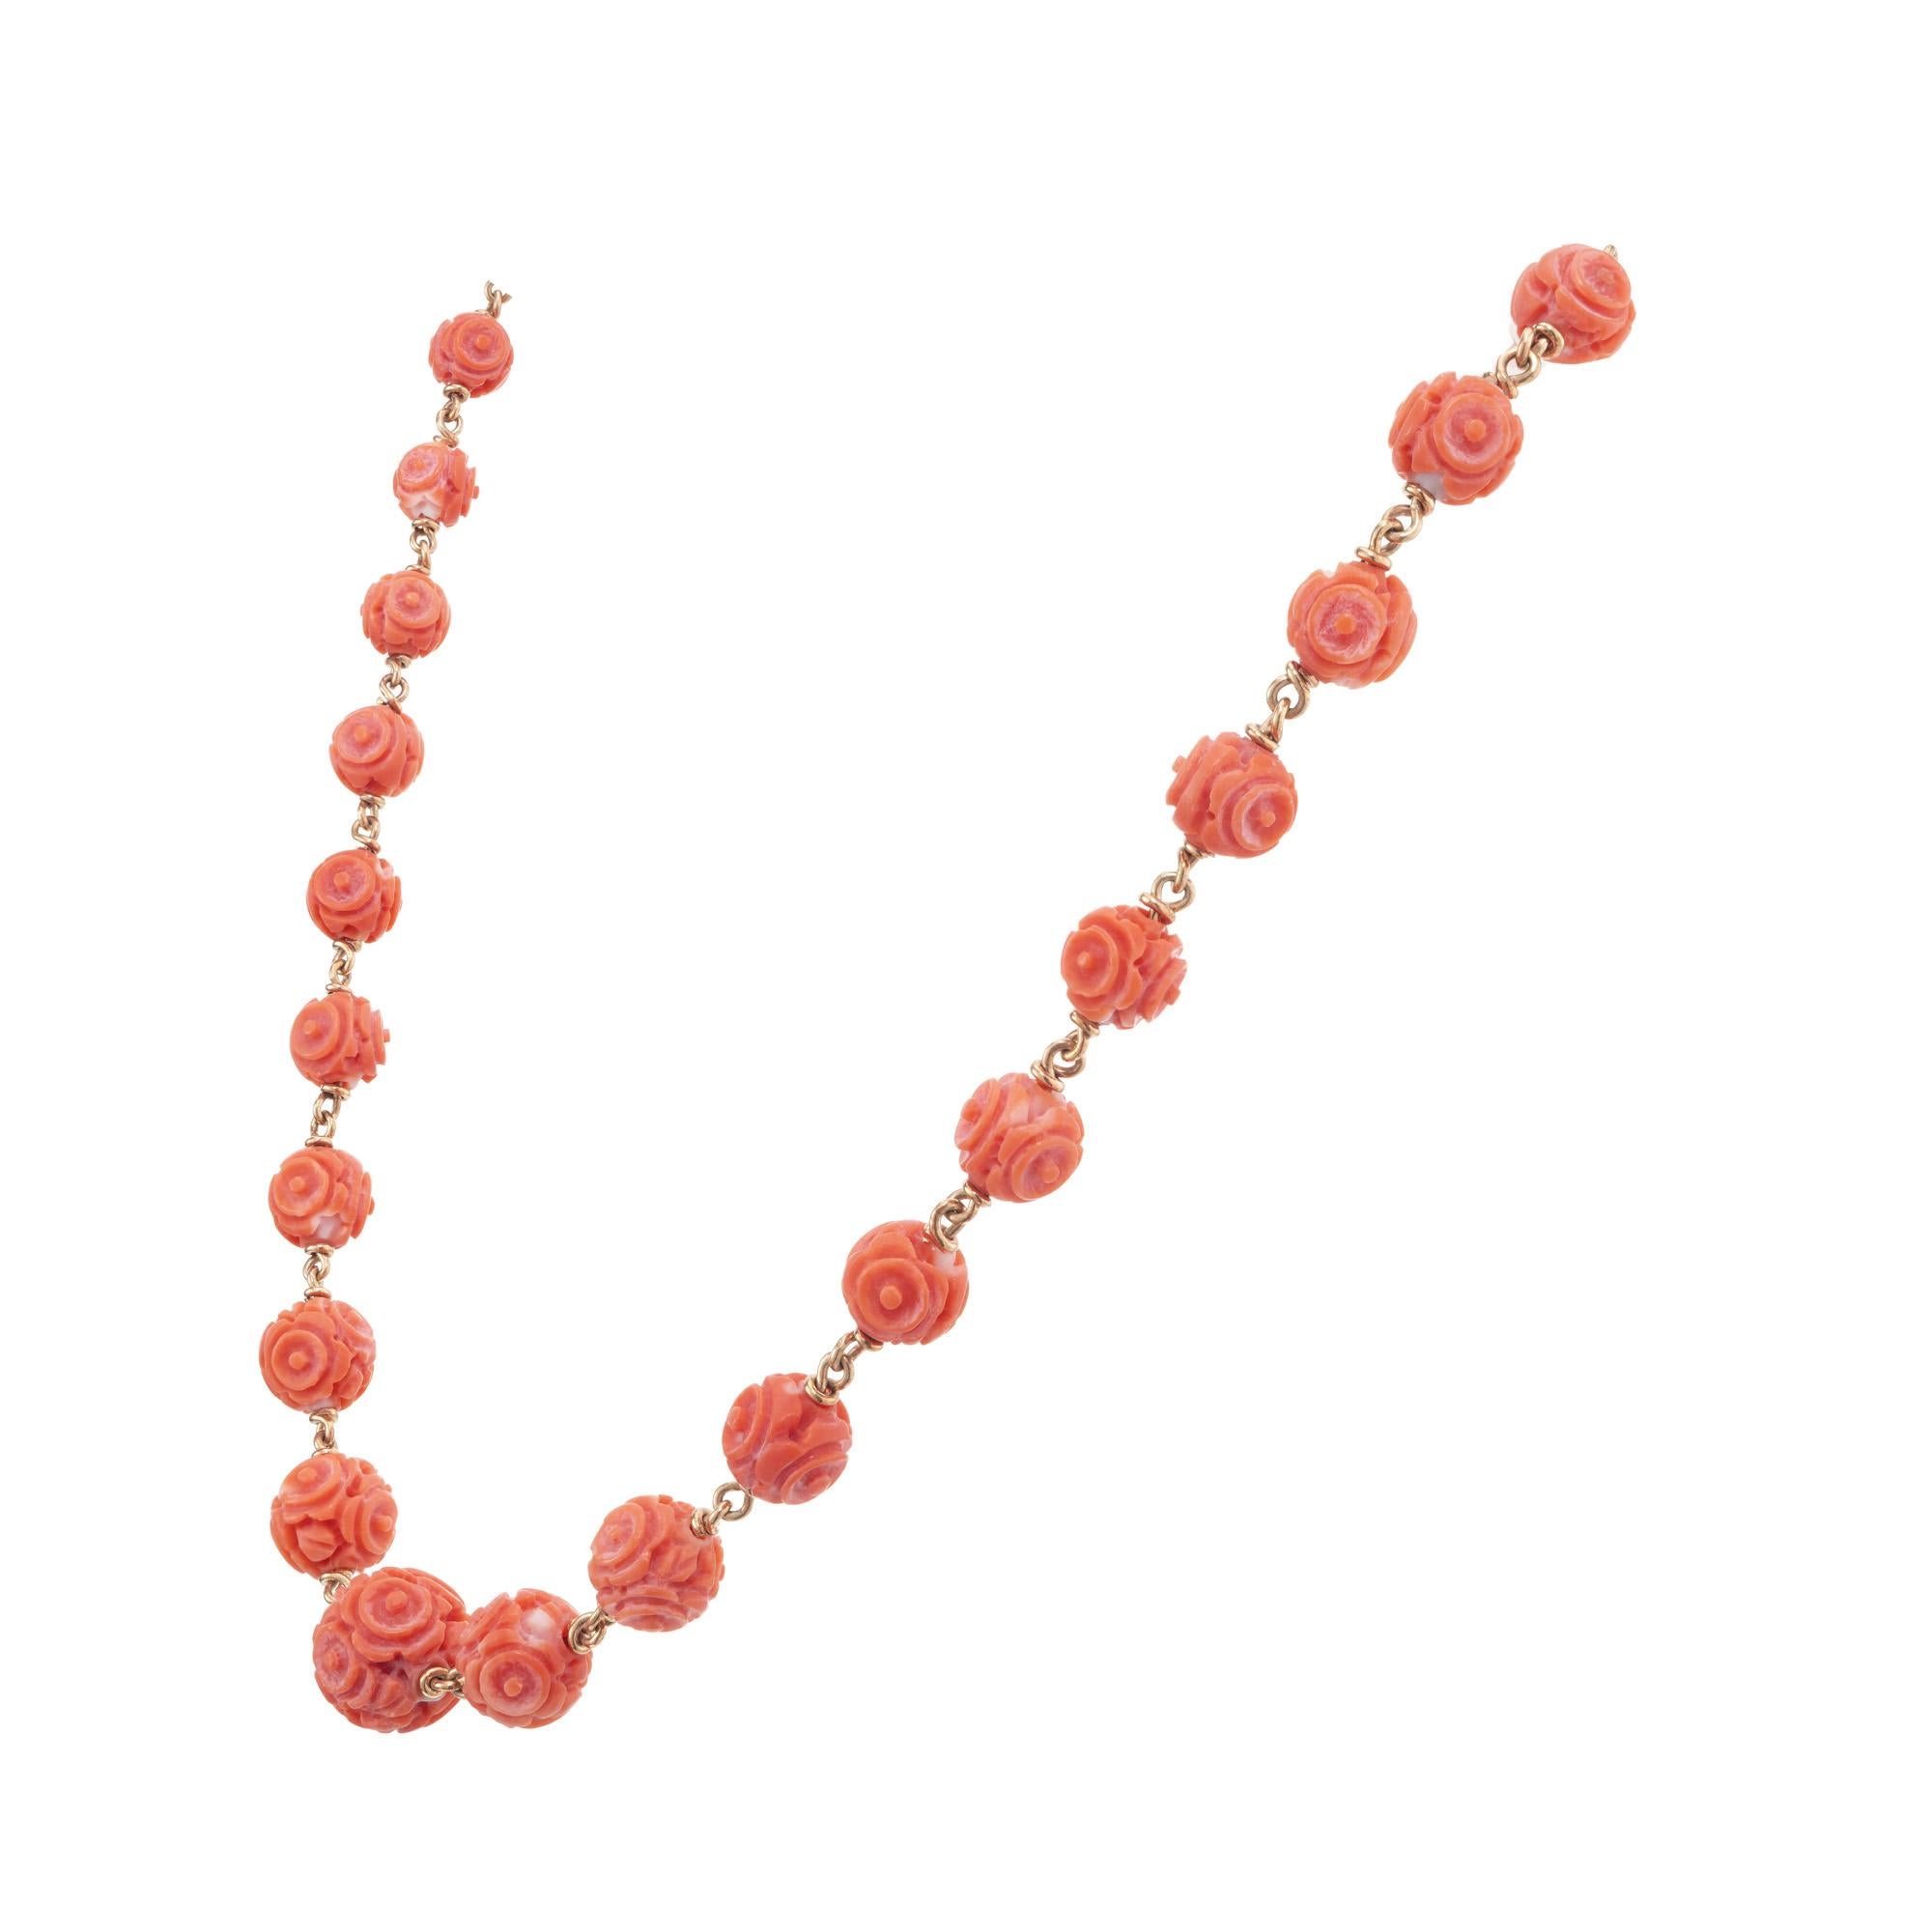 Stunning 1950's hand carved orange Coral bead necklace. 30 GIA certified round graduated carved coral, linked together by 14k yellow gold loops. The coral is highly detailed and beautifully carved. GIA certified as no indication of dye.  16 inches